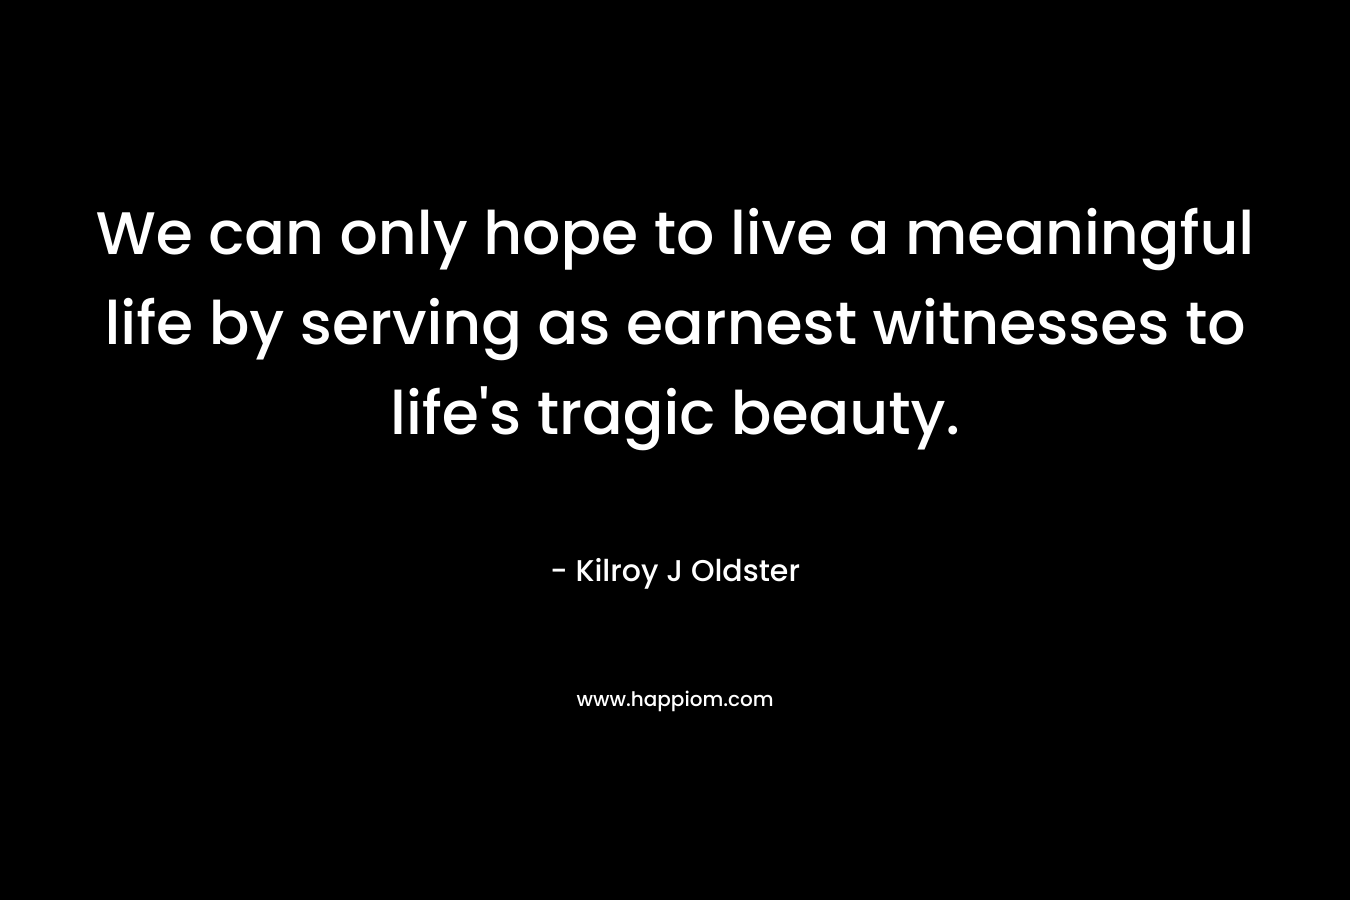 We can only hope to live a meaningful life by serving as earnest witnesses to life’s tragic beauty. – Kilroy J Oldster